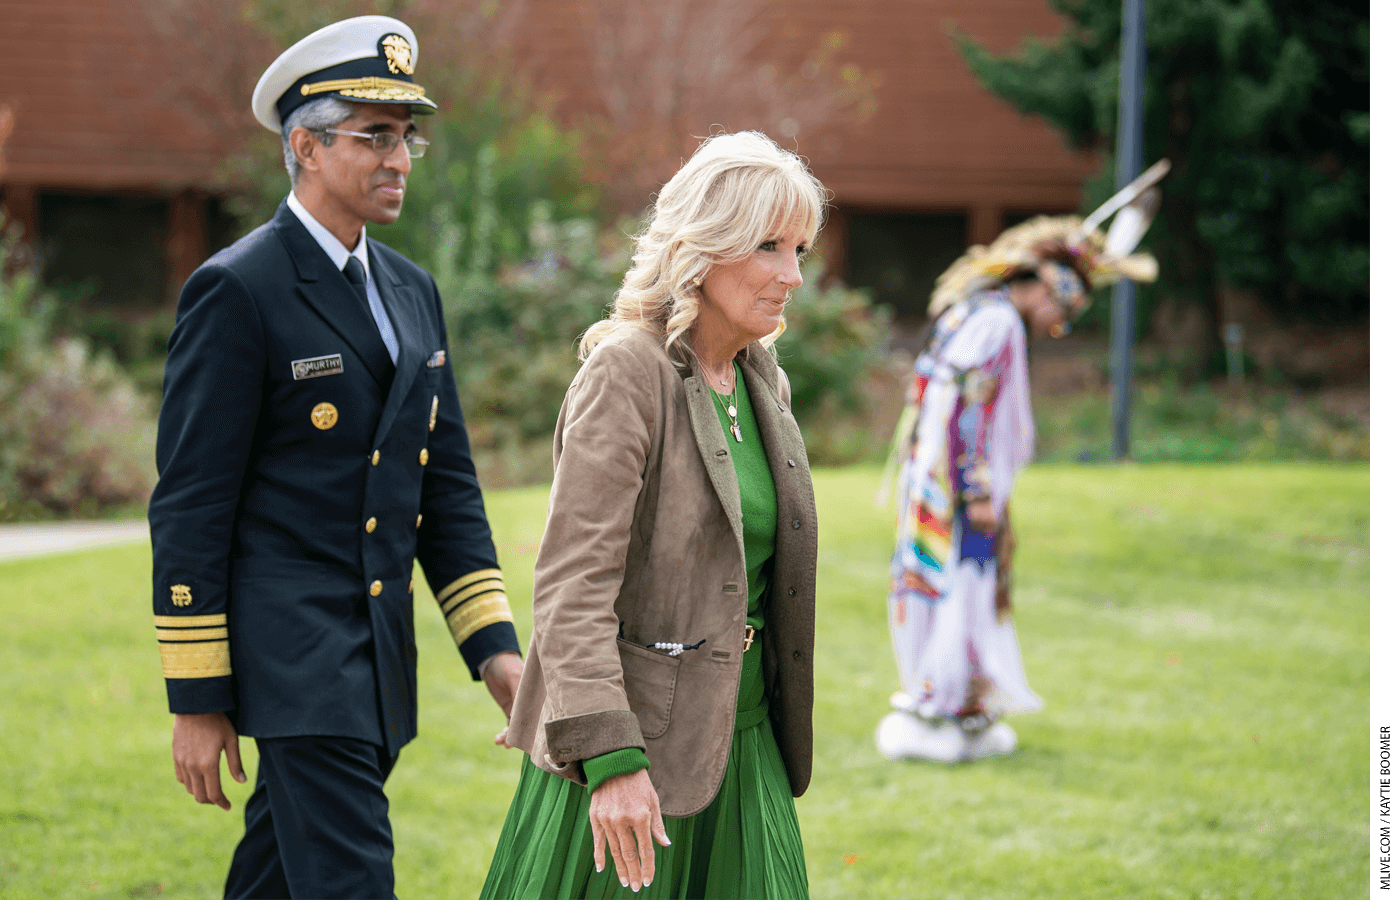 First Lady Jill Biden and Surgeon General Vivek Murthy walks over to the sidewalk before watching a performance by the tribe during a visit to the Ziibiwing Center in Mt. Pleasant for a listening session focused on youth mental health with members of the Saginaw Chippewa Indian Tribe on Sunday, Oct. 24, 2021.